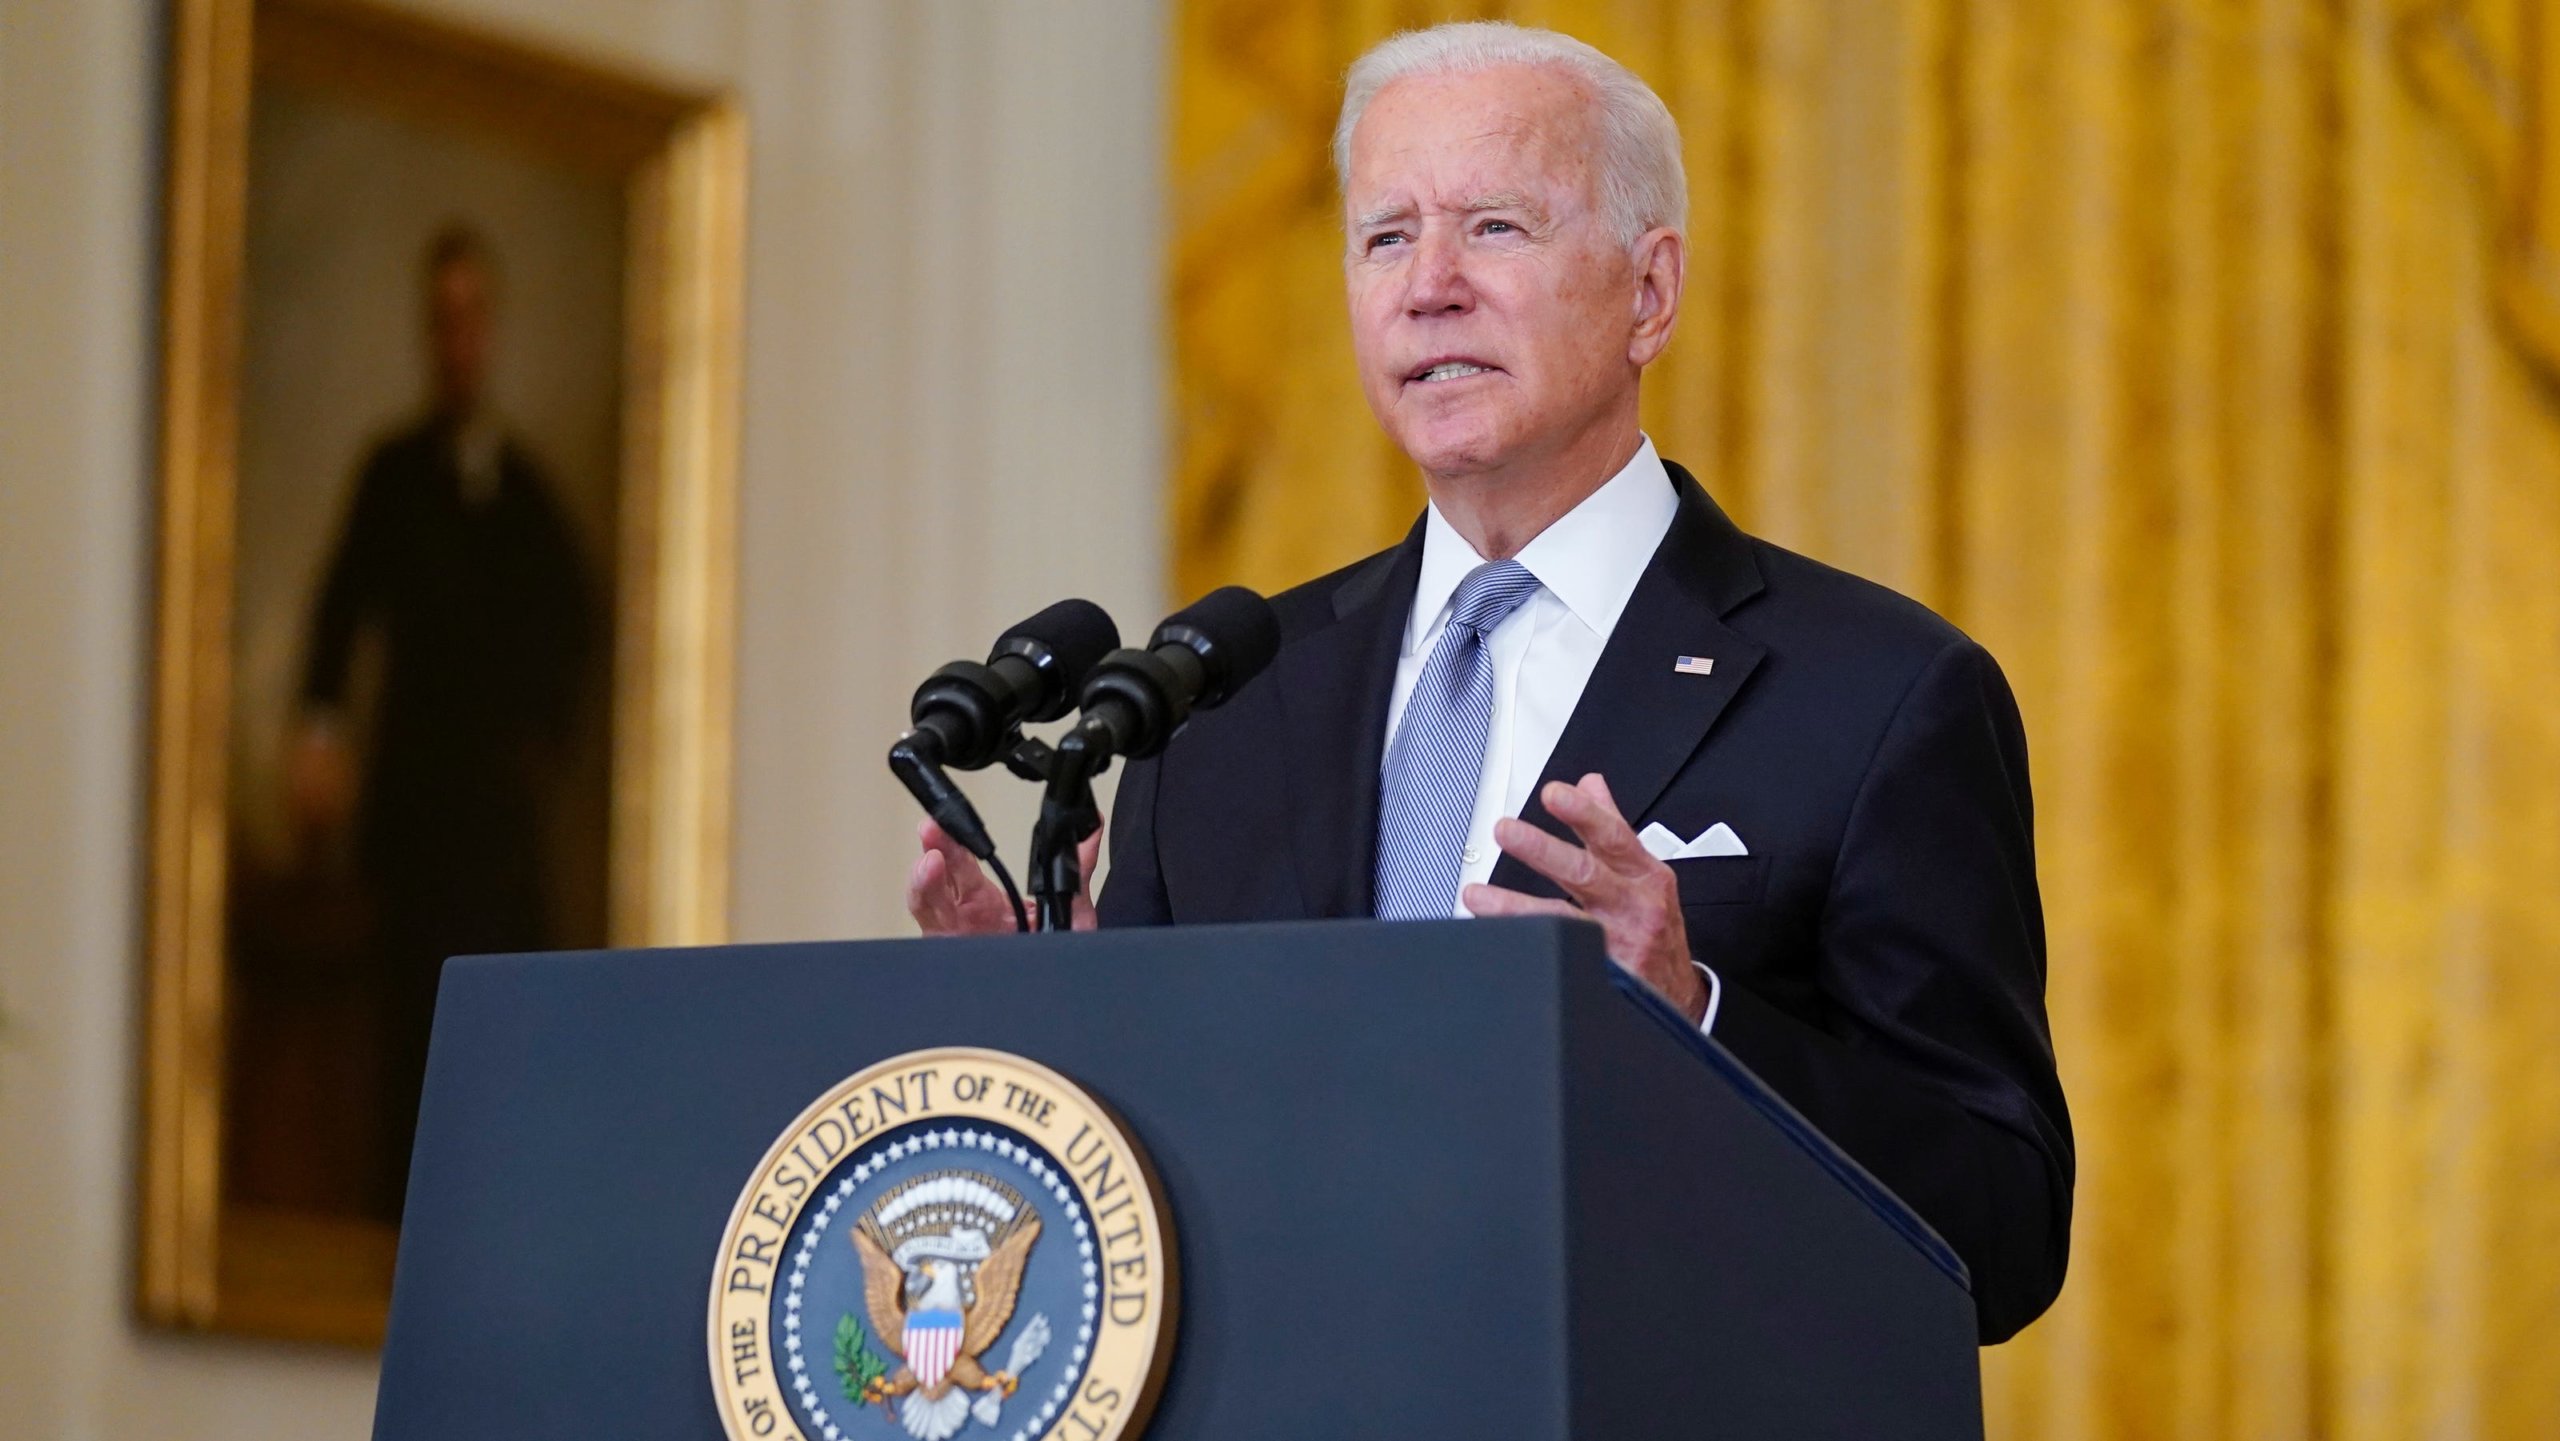 'For what Joe Biden stands ground on Afghanistan exit